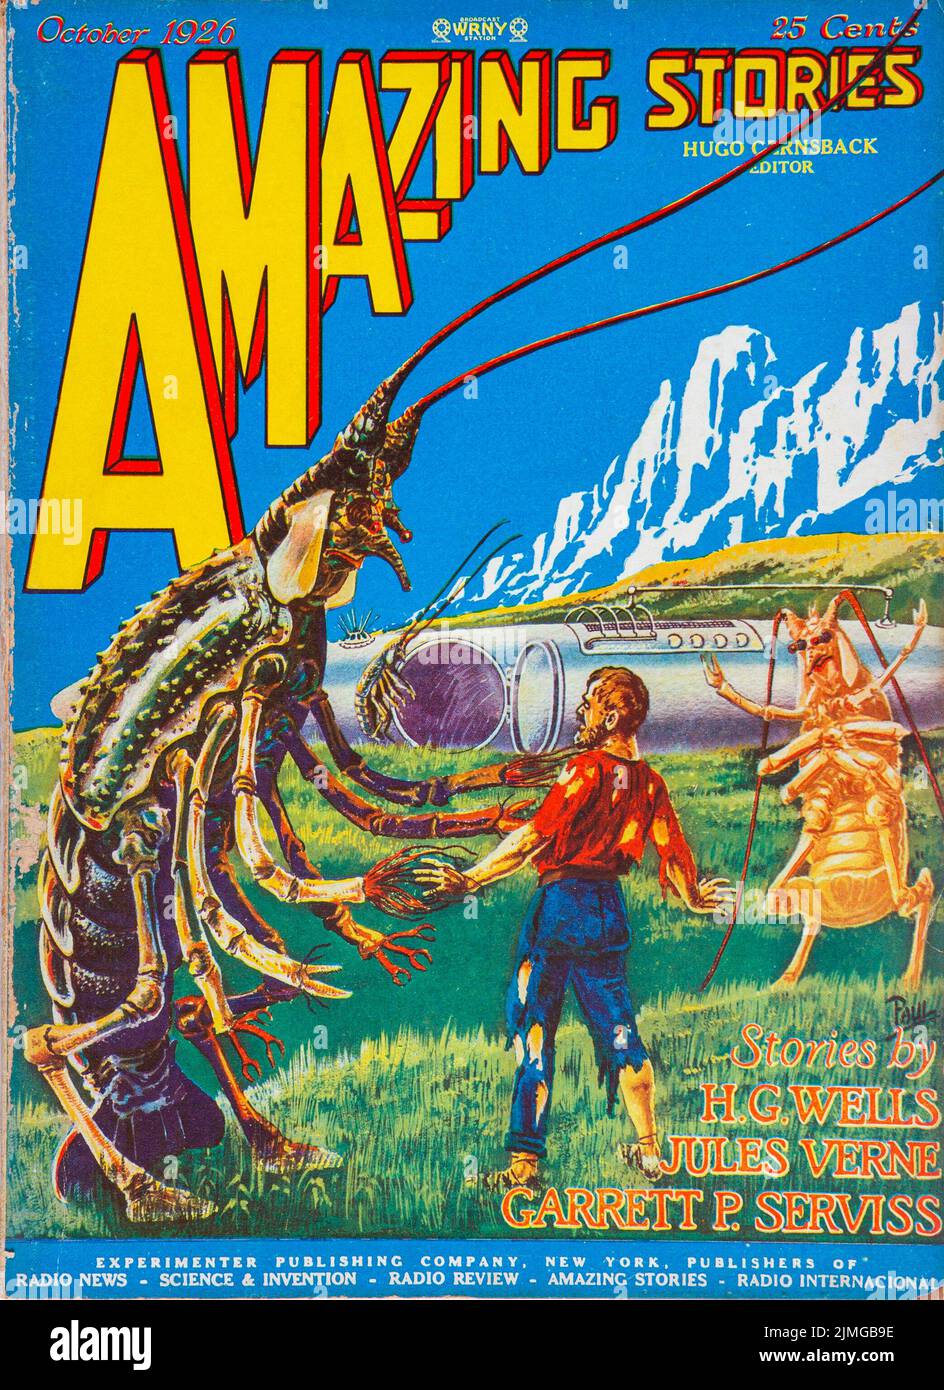 ART PRINT POSTER COMIC COVER AMAZING STORIES WELLS VERNE GIANT FLY NOFL0580 